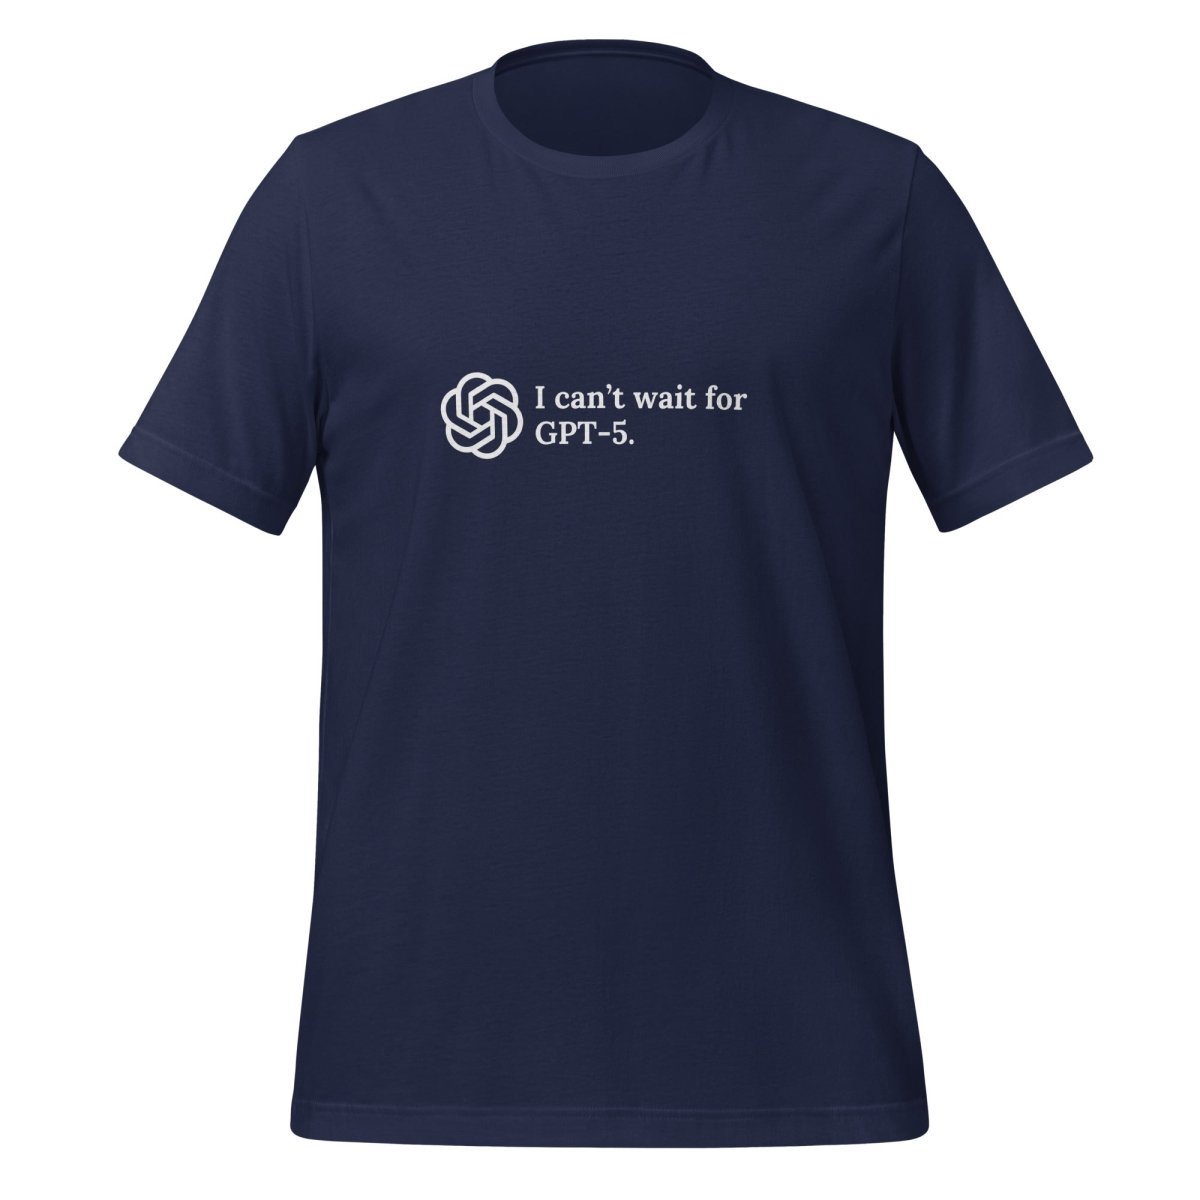 I can't wait for GPT - 5. T - Shirt (unisex) - Navy - AI Store